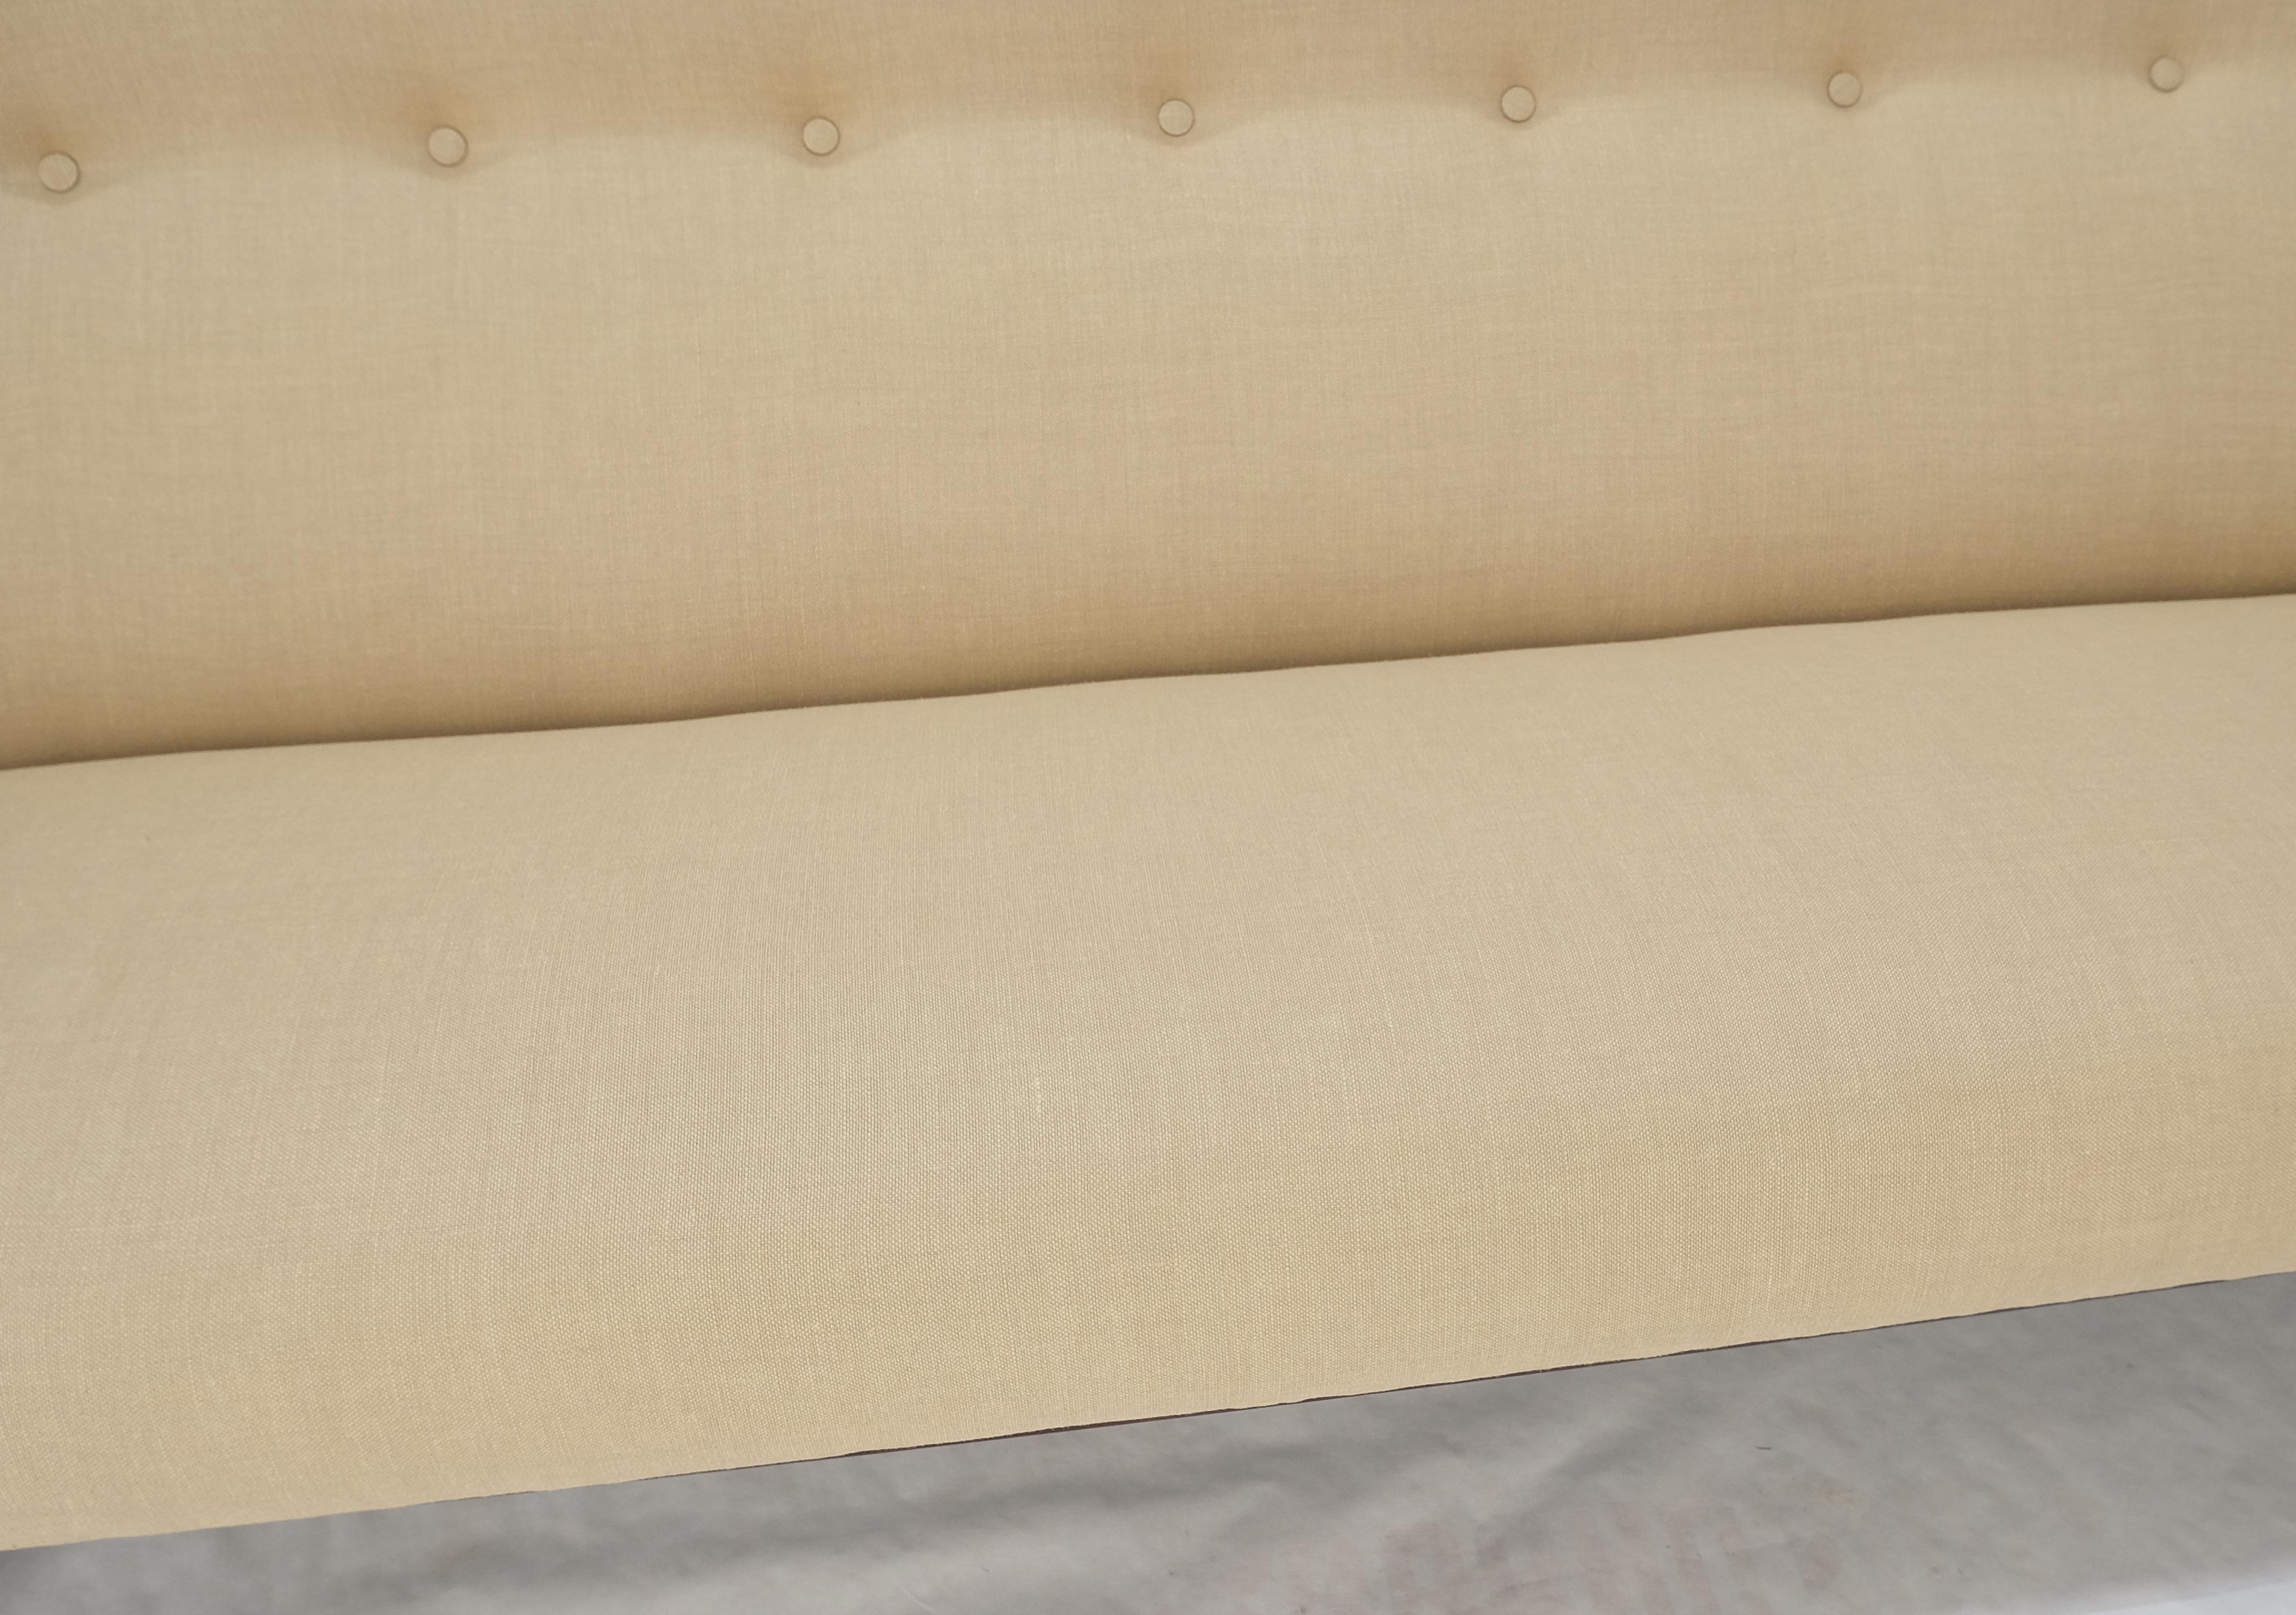 Jens Risom NEW Beige Linen Upholstery Oiled Walnut Frame c1960s Sofa Couch MINT! For Sale 5